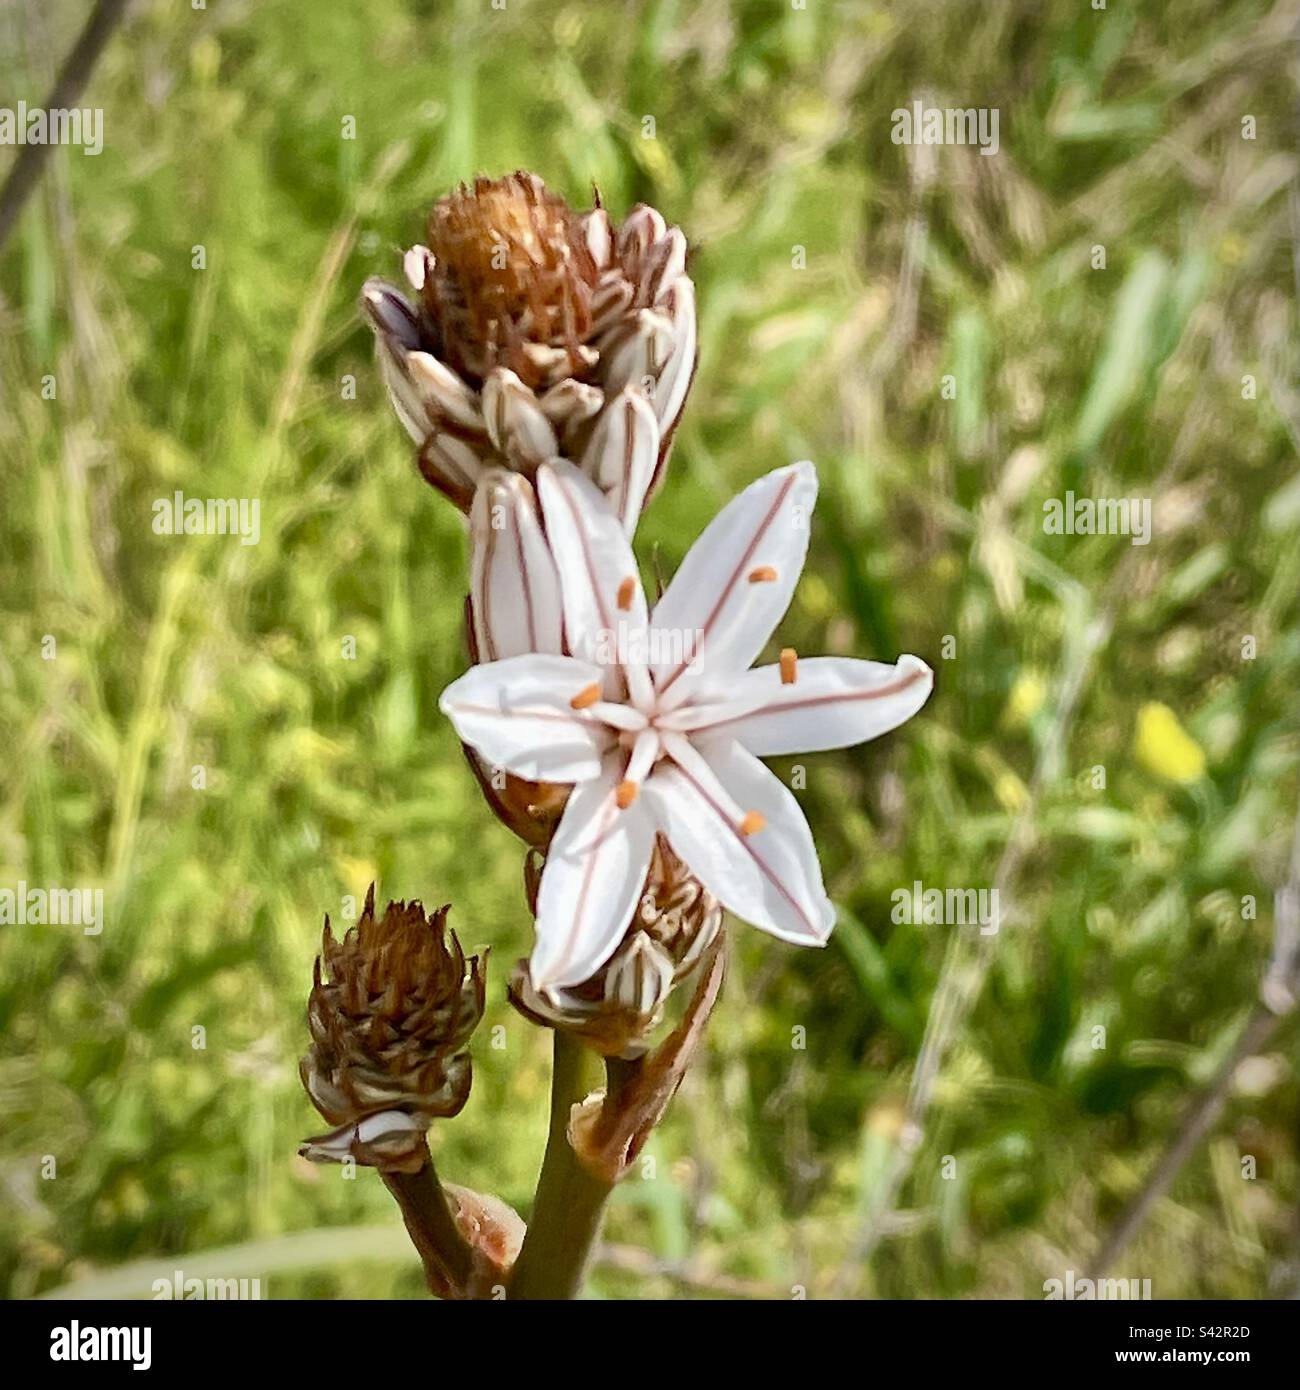 Spring wildflowers. Closeup view of an onion weed flower. The branched asphodel is native to the Mediterranean region and grows wild in rural Portugal. Stock Photo